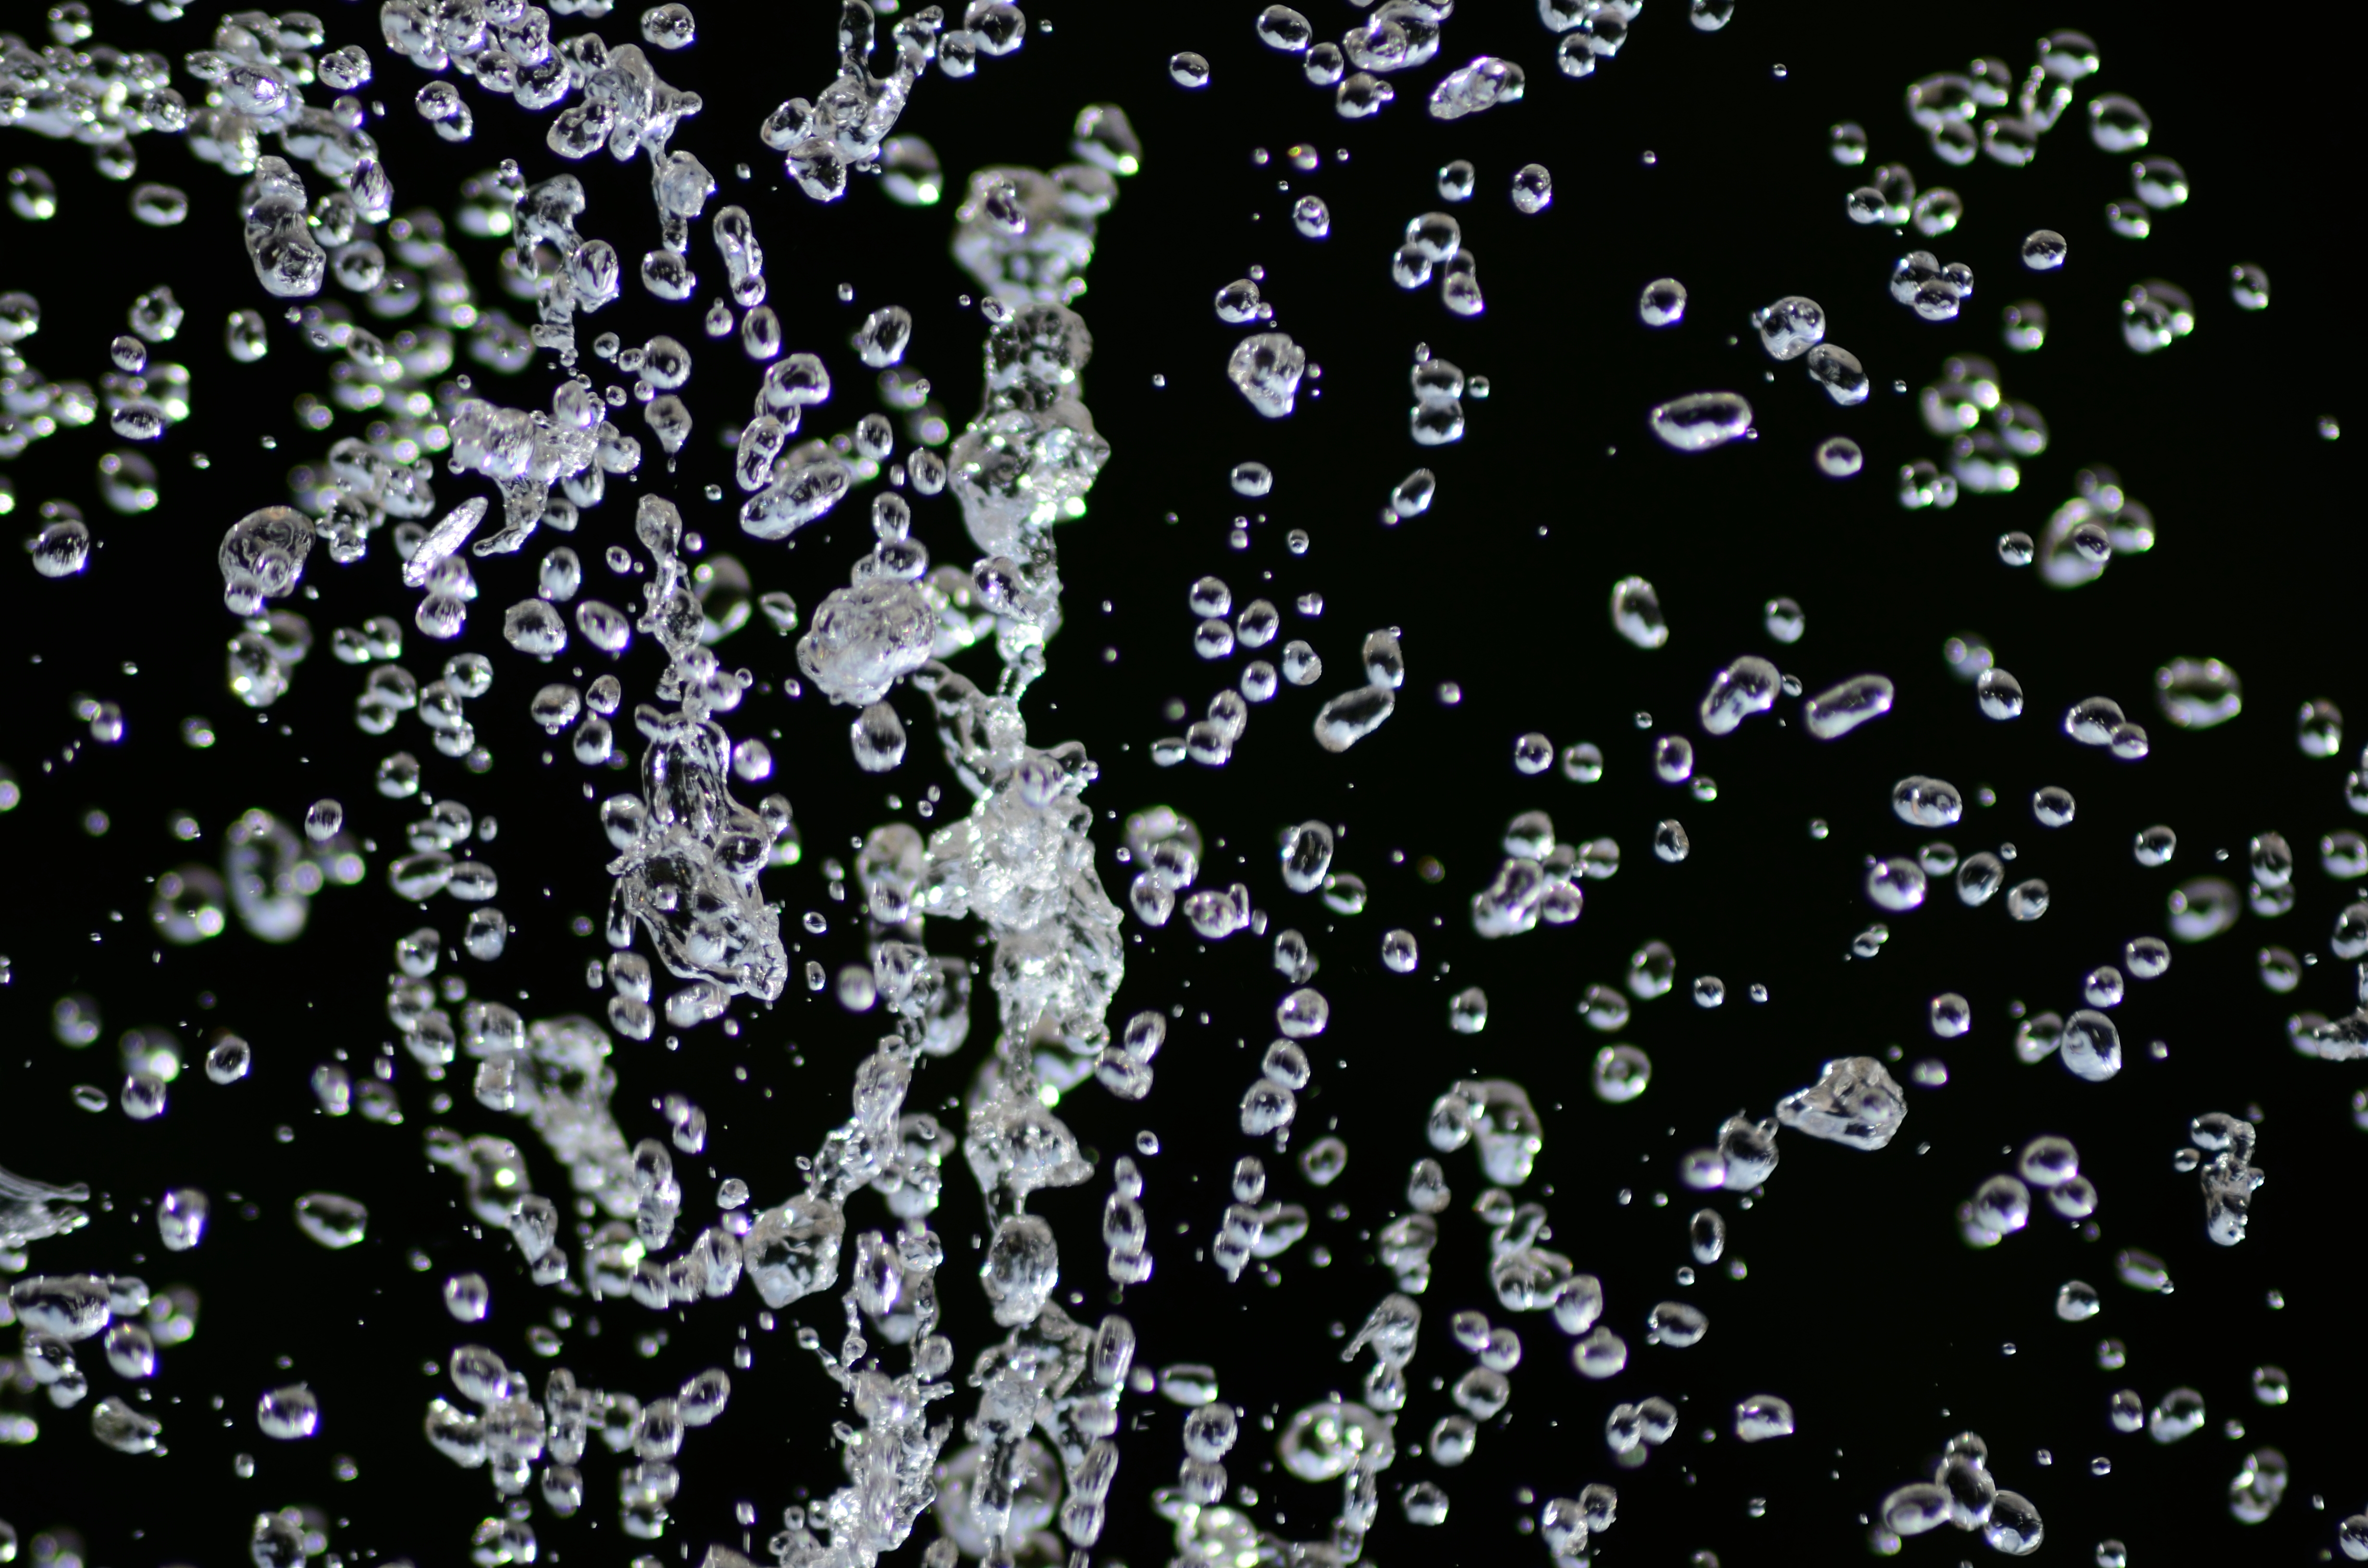 Water Drops against Black Background | gimmeges